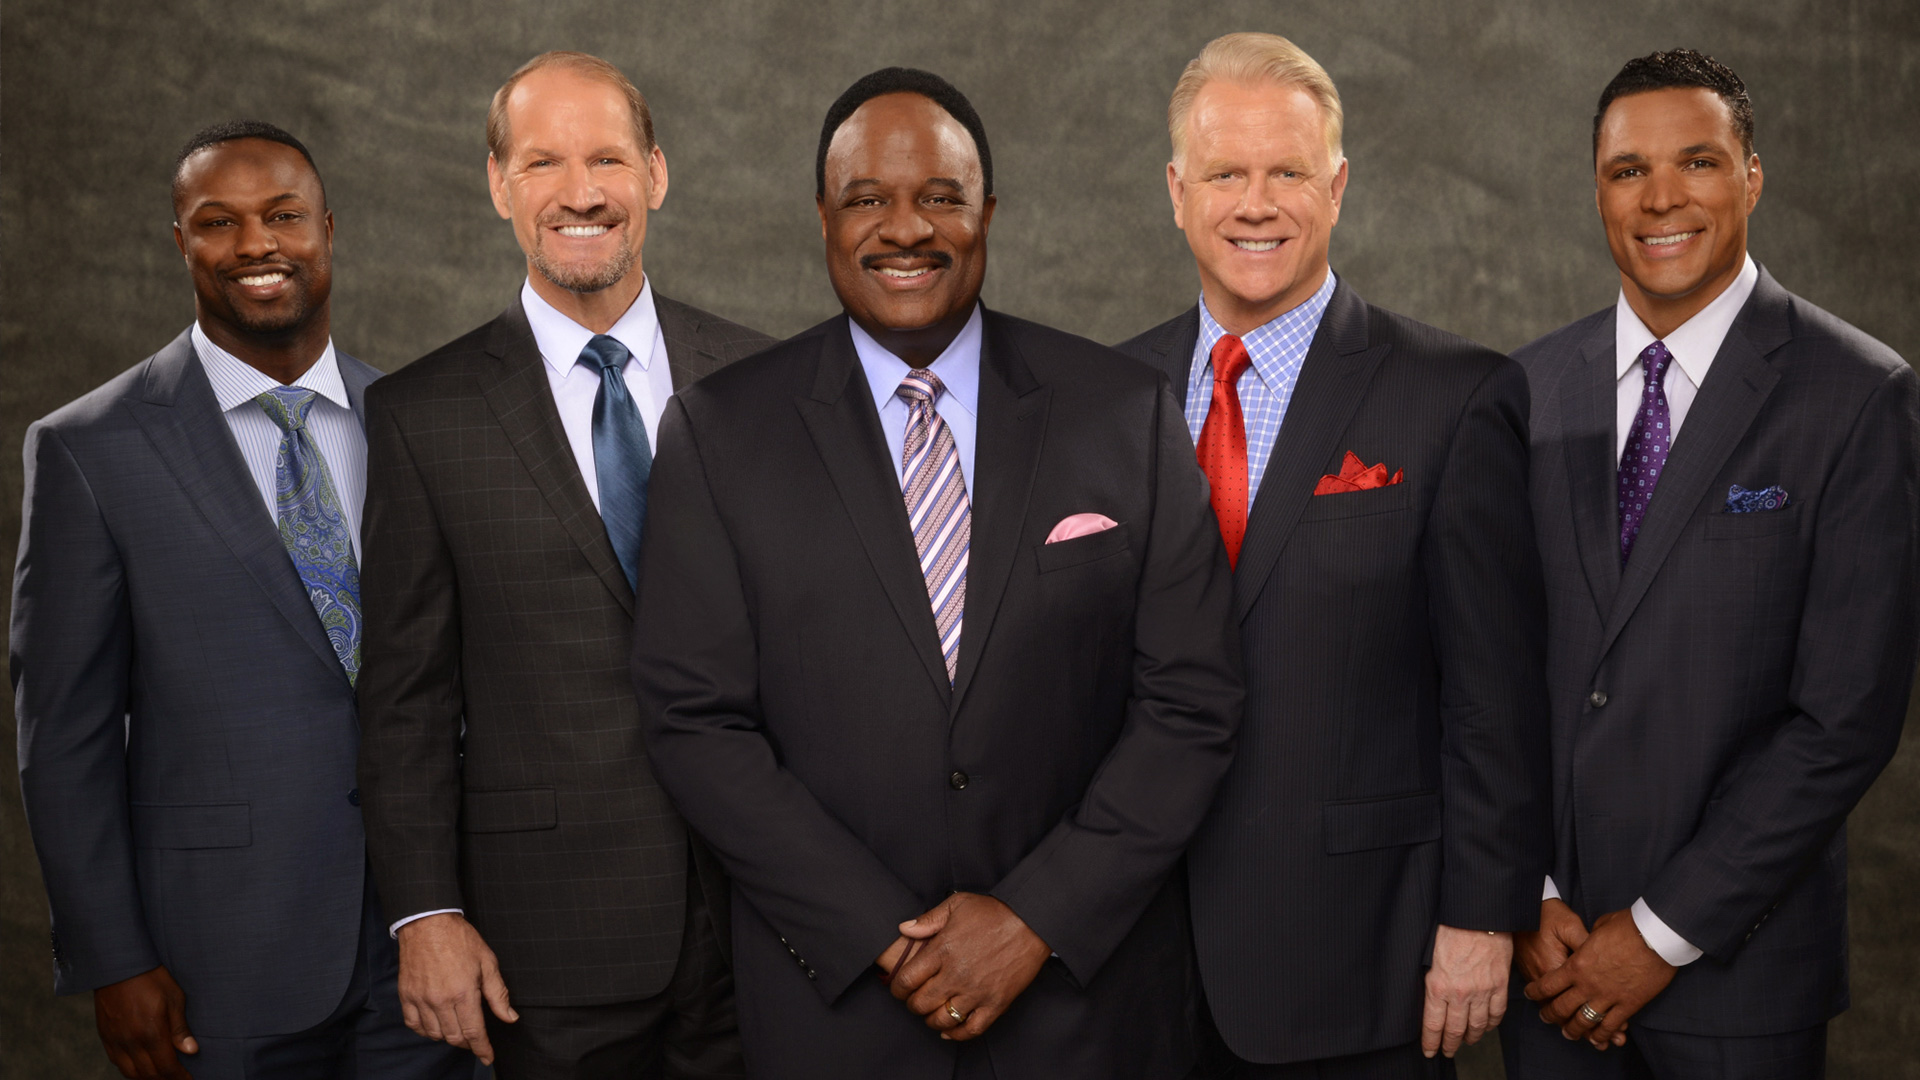 Best NFL announcers on television? You be the judge Sporting News